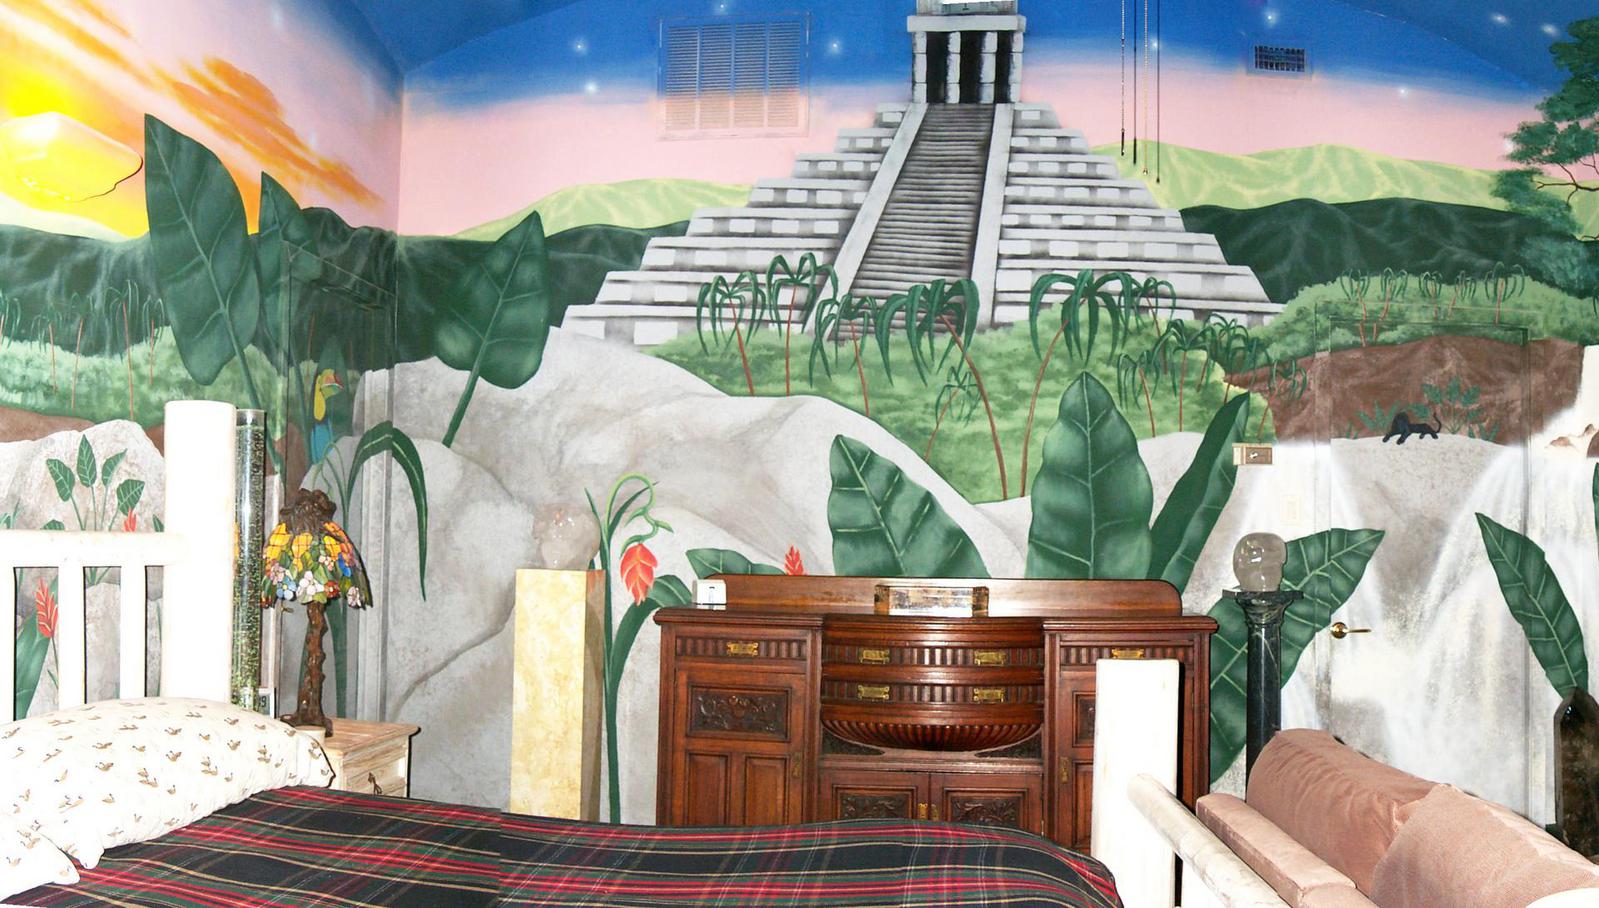 The "mayan" bedroom features a mural of a Mayan pyramid. 